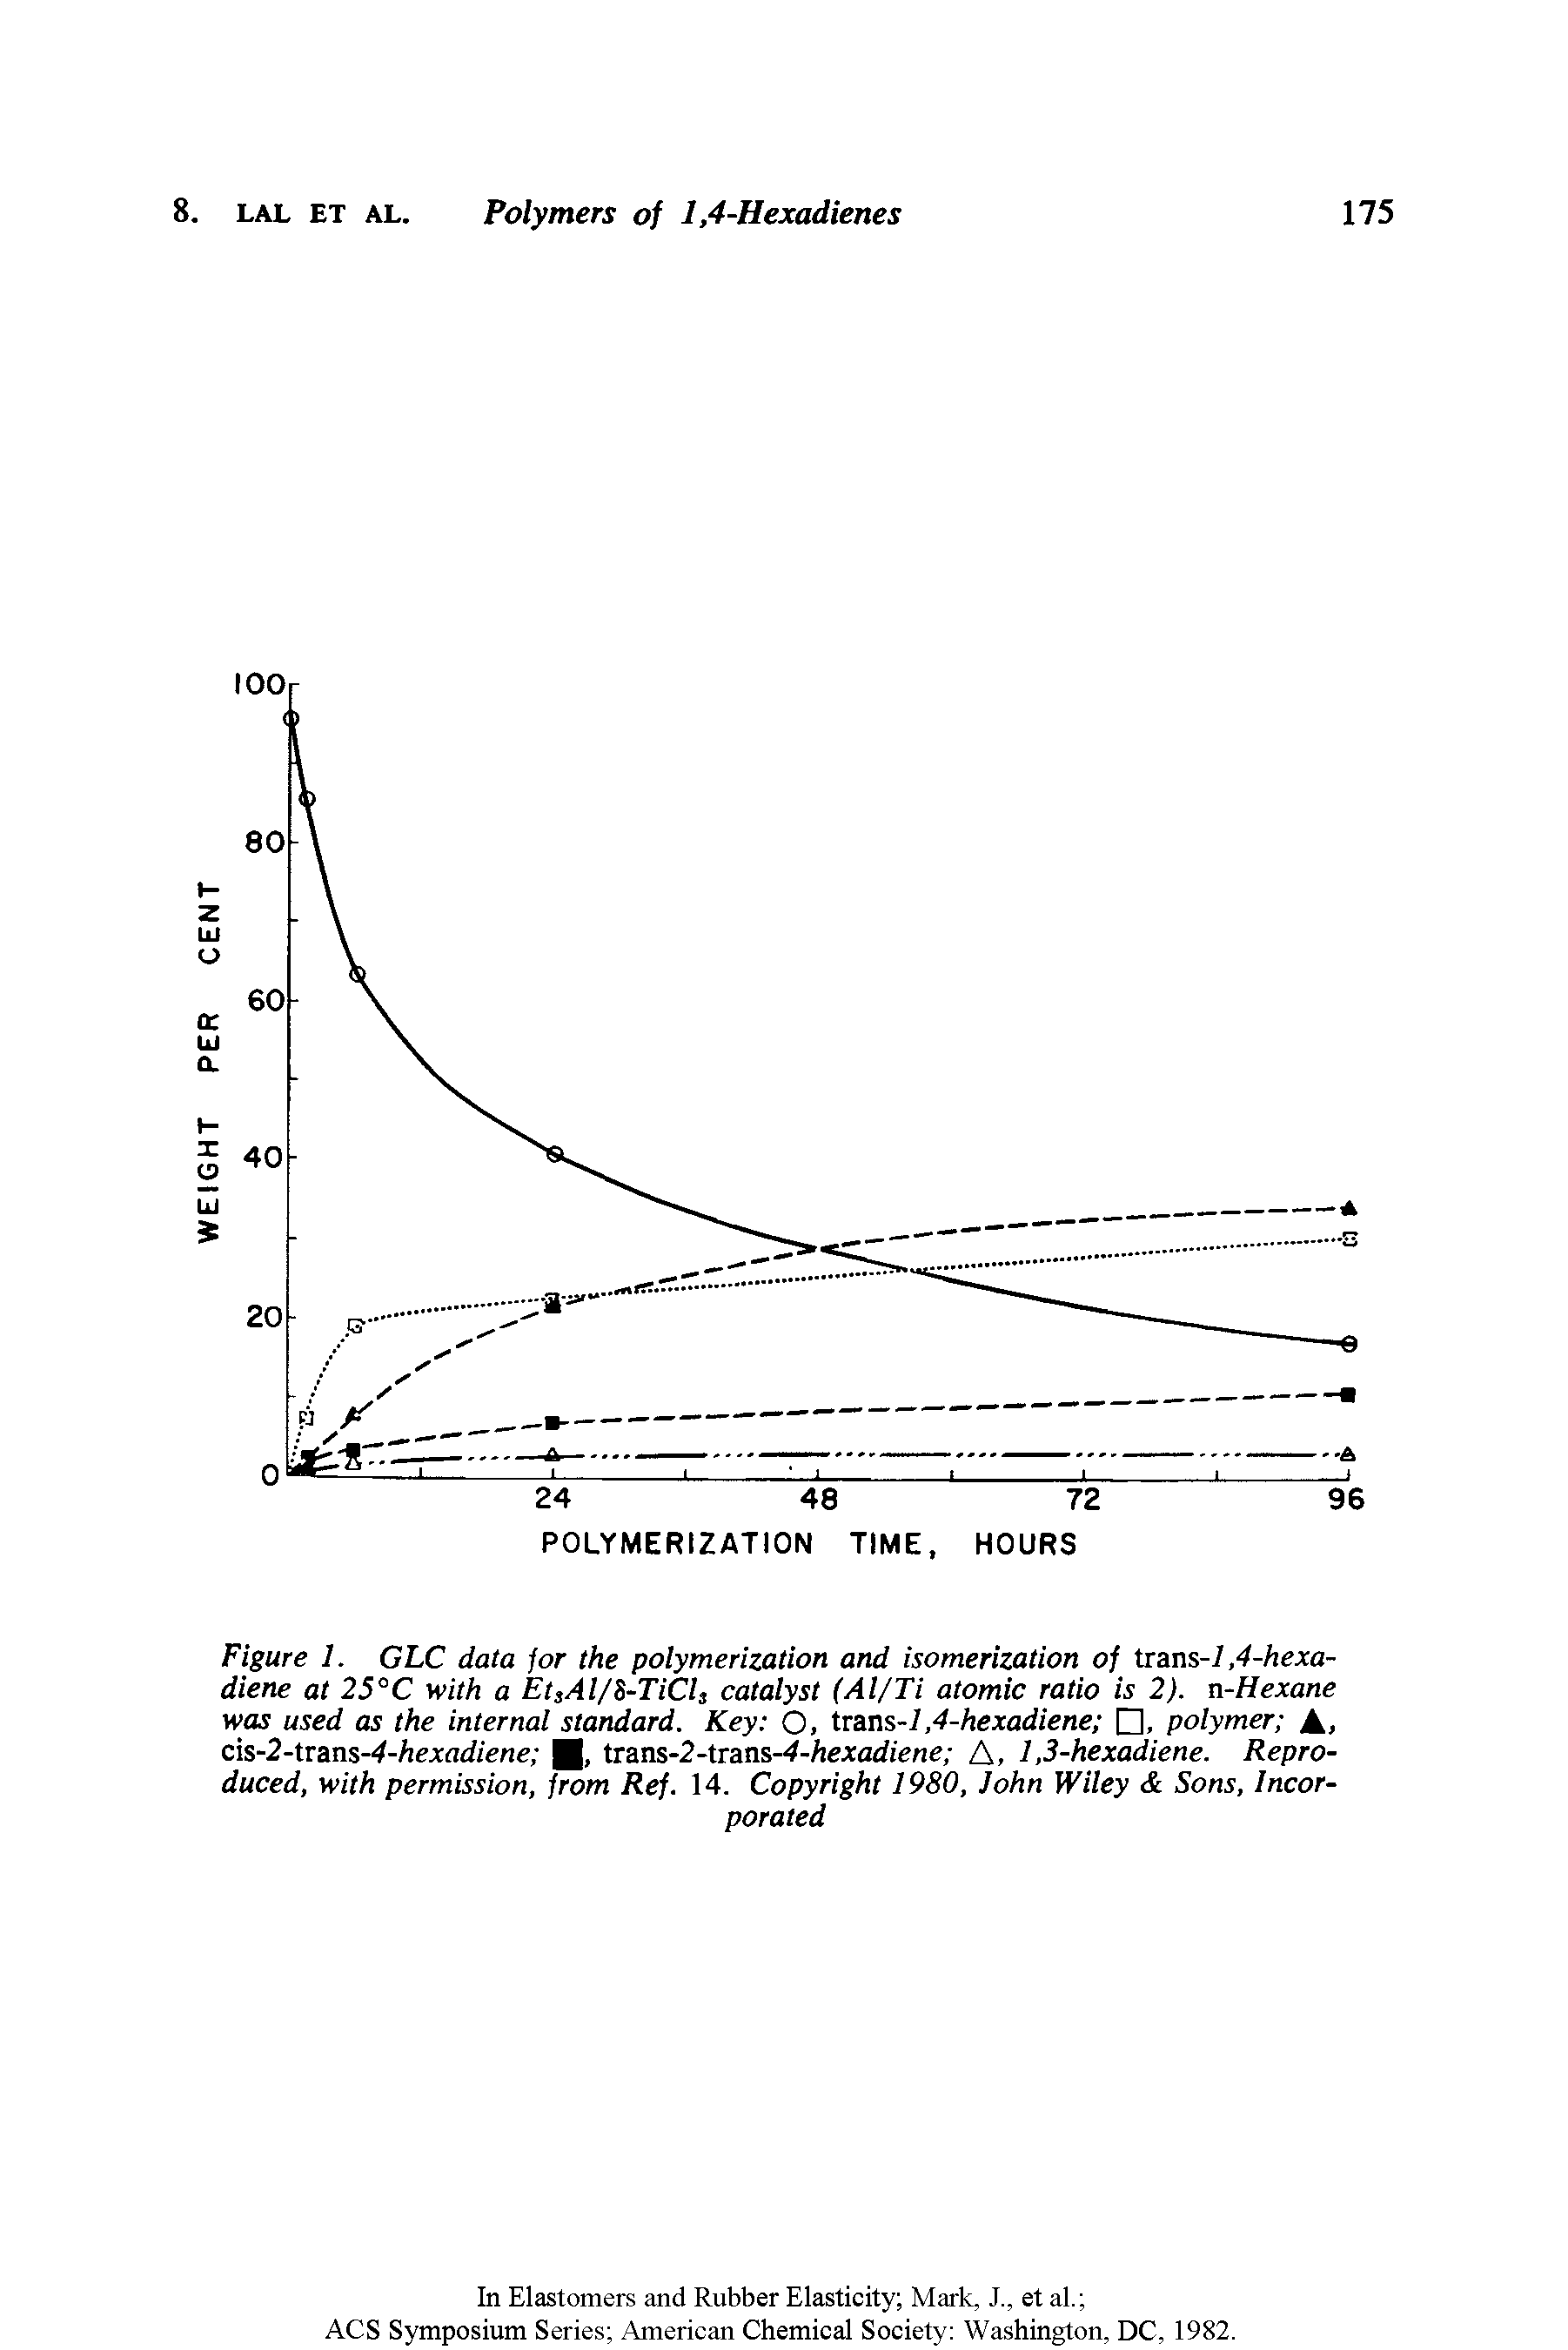 Figure 1. GLC data for the polymerization and isomerization of trans-1,4-hexa-diene at 25°C with a Et3Al/S-TiCls catalyst (Al/Ti atomic ratio is 2). n-Hexane was used as the internal standard. Key O, trans-7,4-hexadiene , polymer A, cis-2-tzans-4-hexadiene tTans-2-trans-4-hexadiene A, 1,3-hexadiene. Reproduced, with permission, from Ref. 14. Copyright 1980, John Wiley Sons, Incorporated...